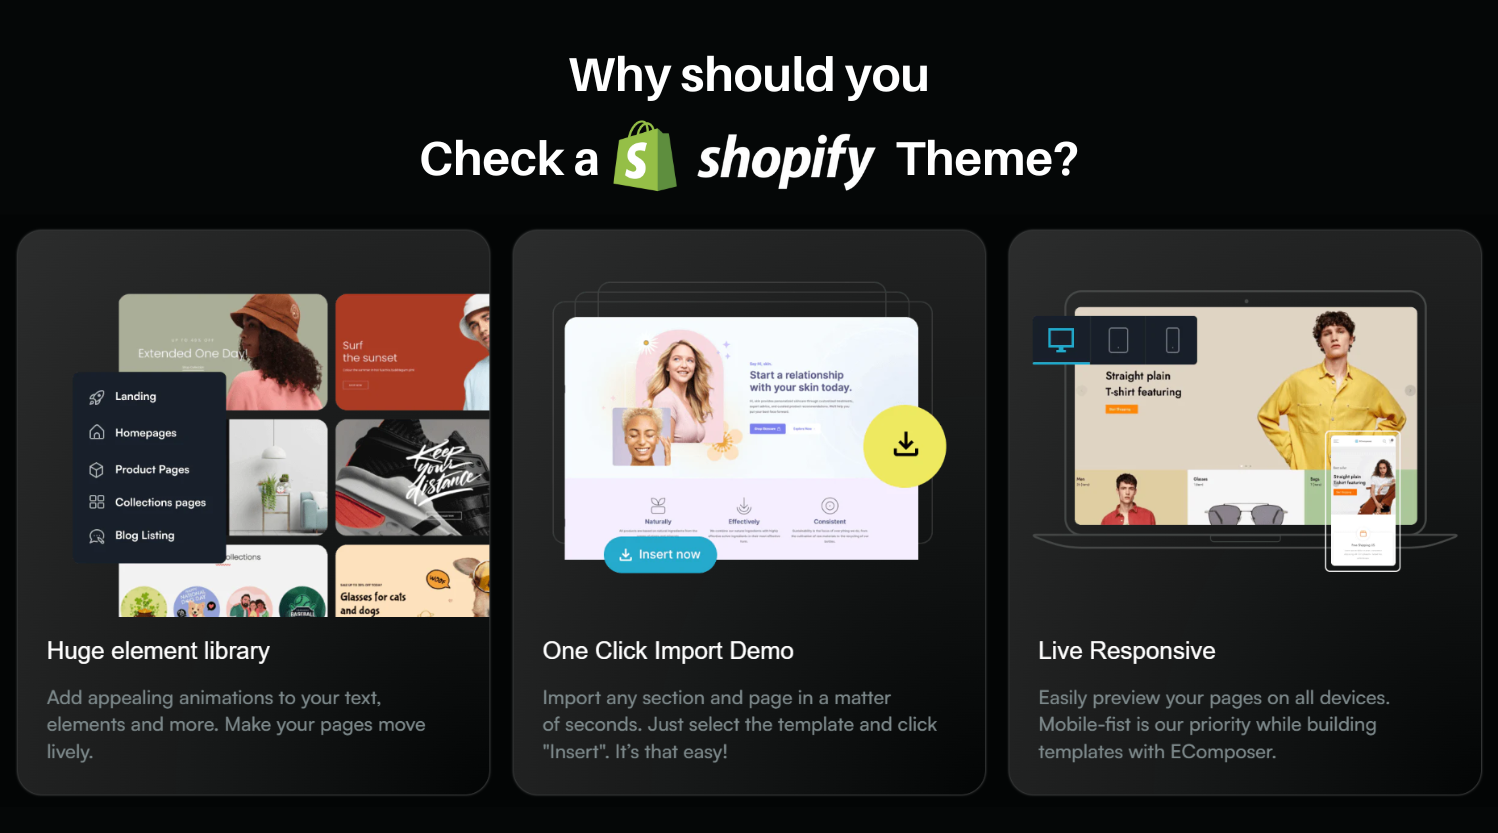 What’s the point of Checking Shopify Themes of any store?